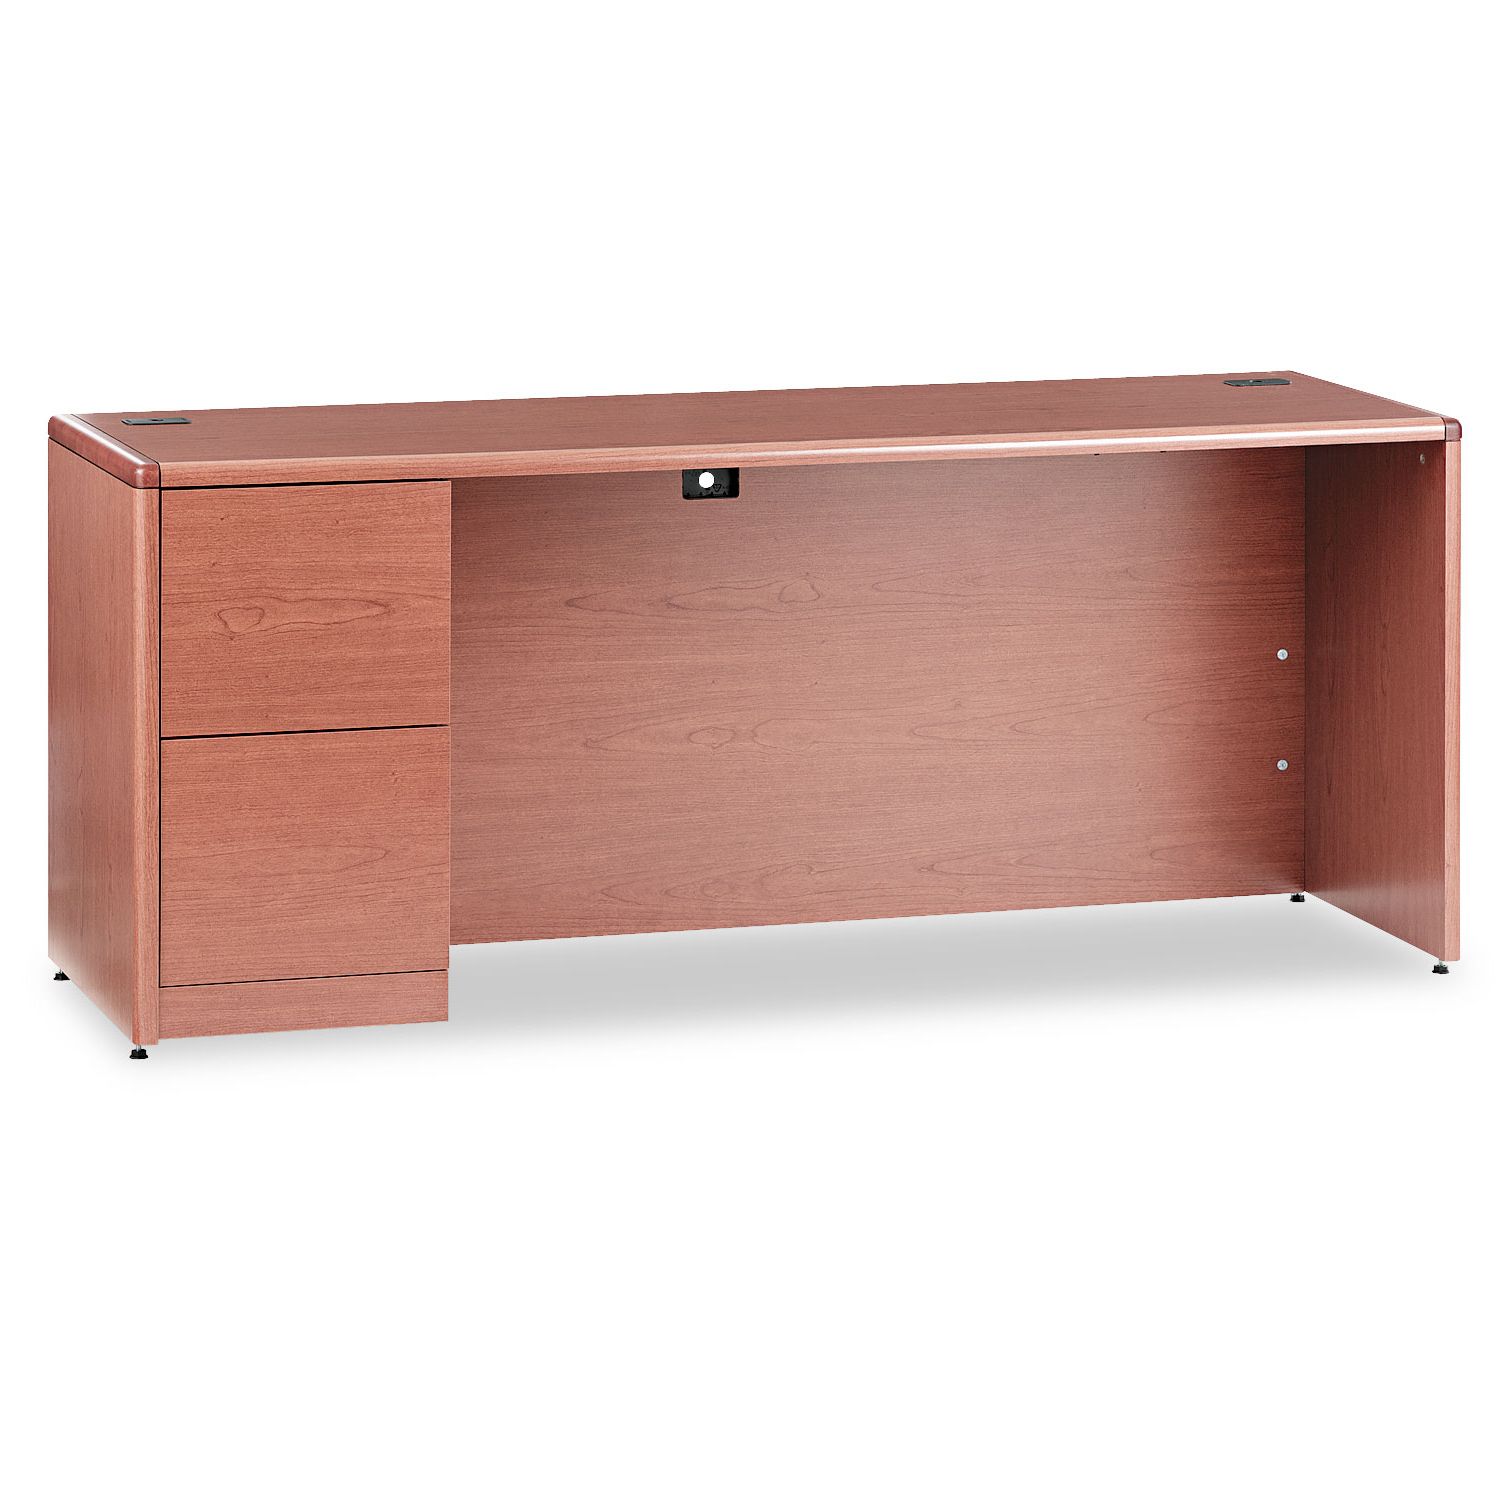 10700 Series Right Pedestal Credenza, 72w X 24d X 29 1/2h Intended For Barr Credenzas (View 10 of 20)